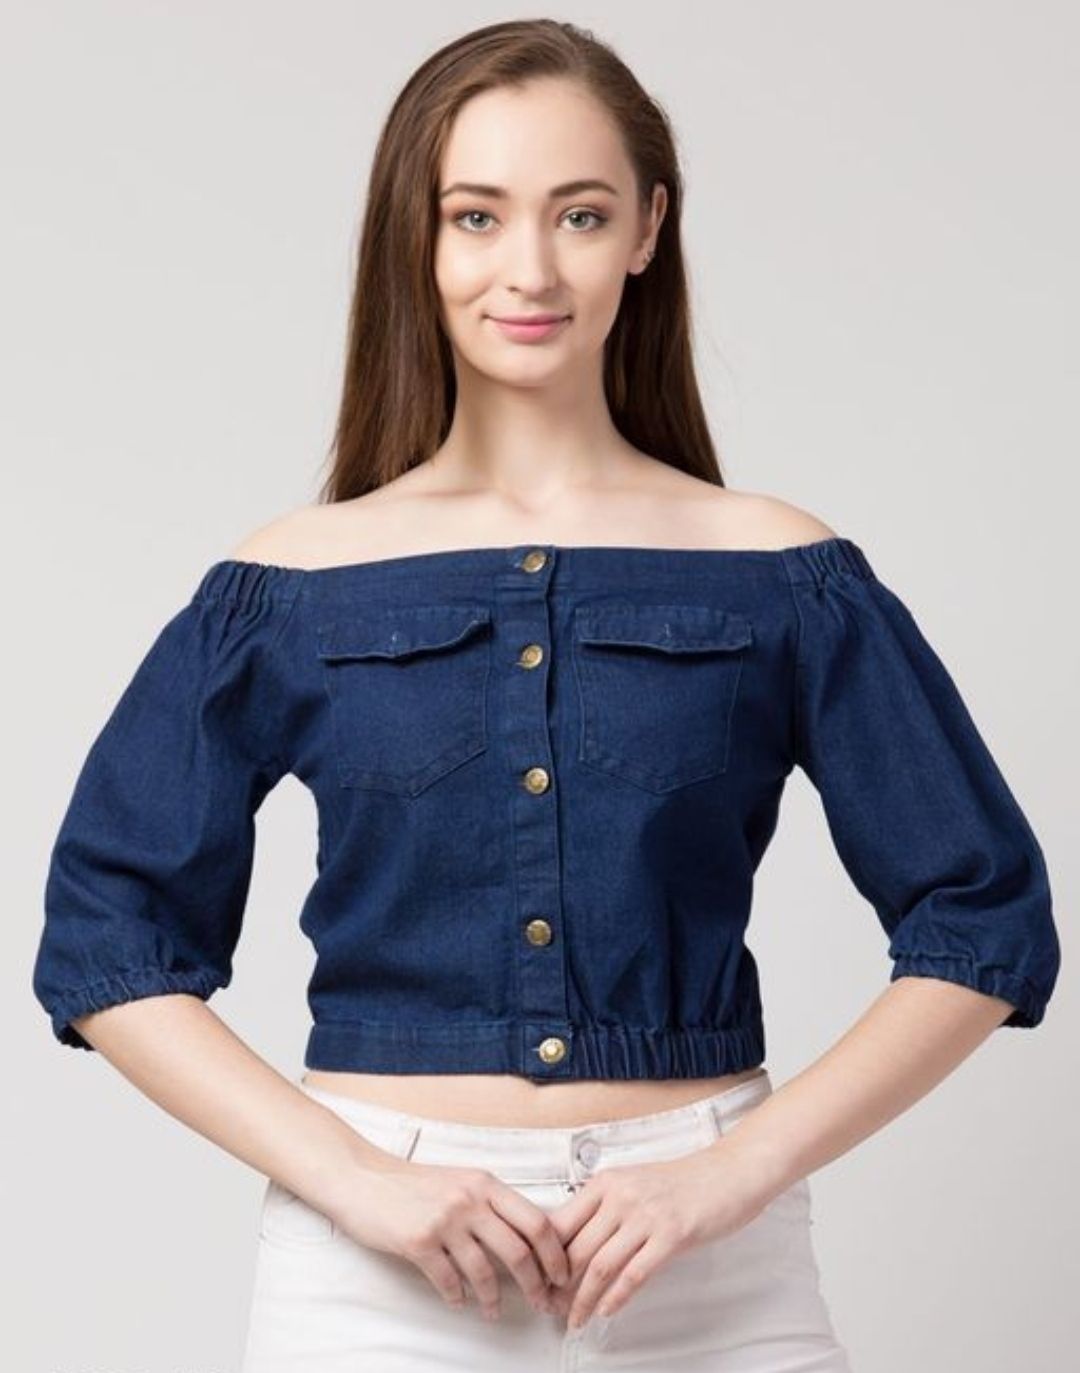 20 Trendy Spring Outfits With Off The Shoulder Tops - Styleoholic